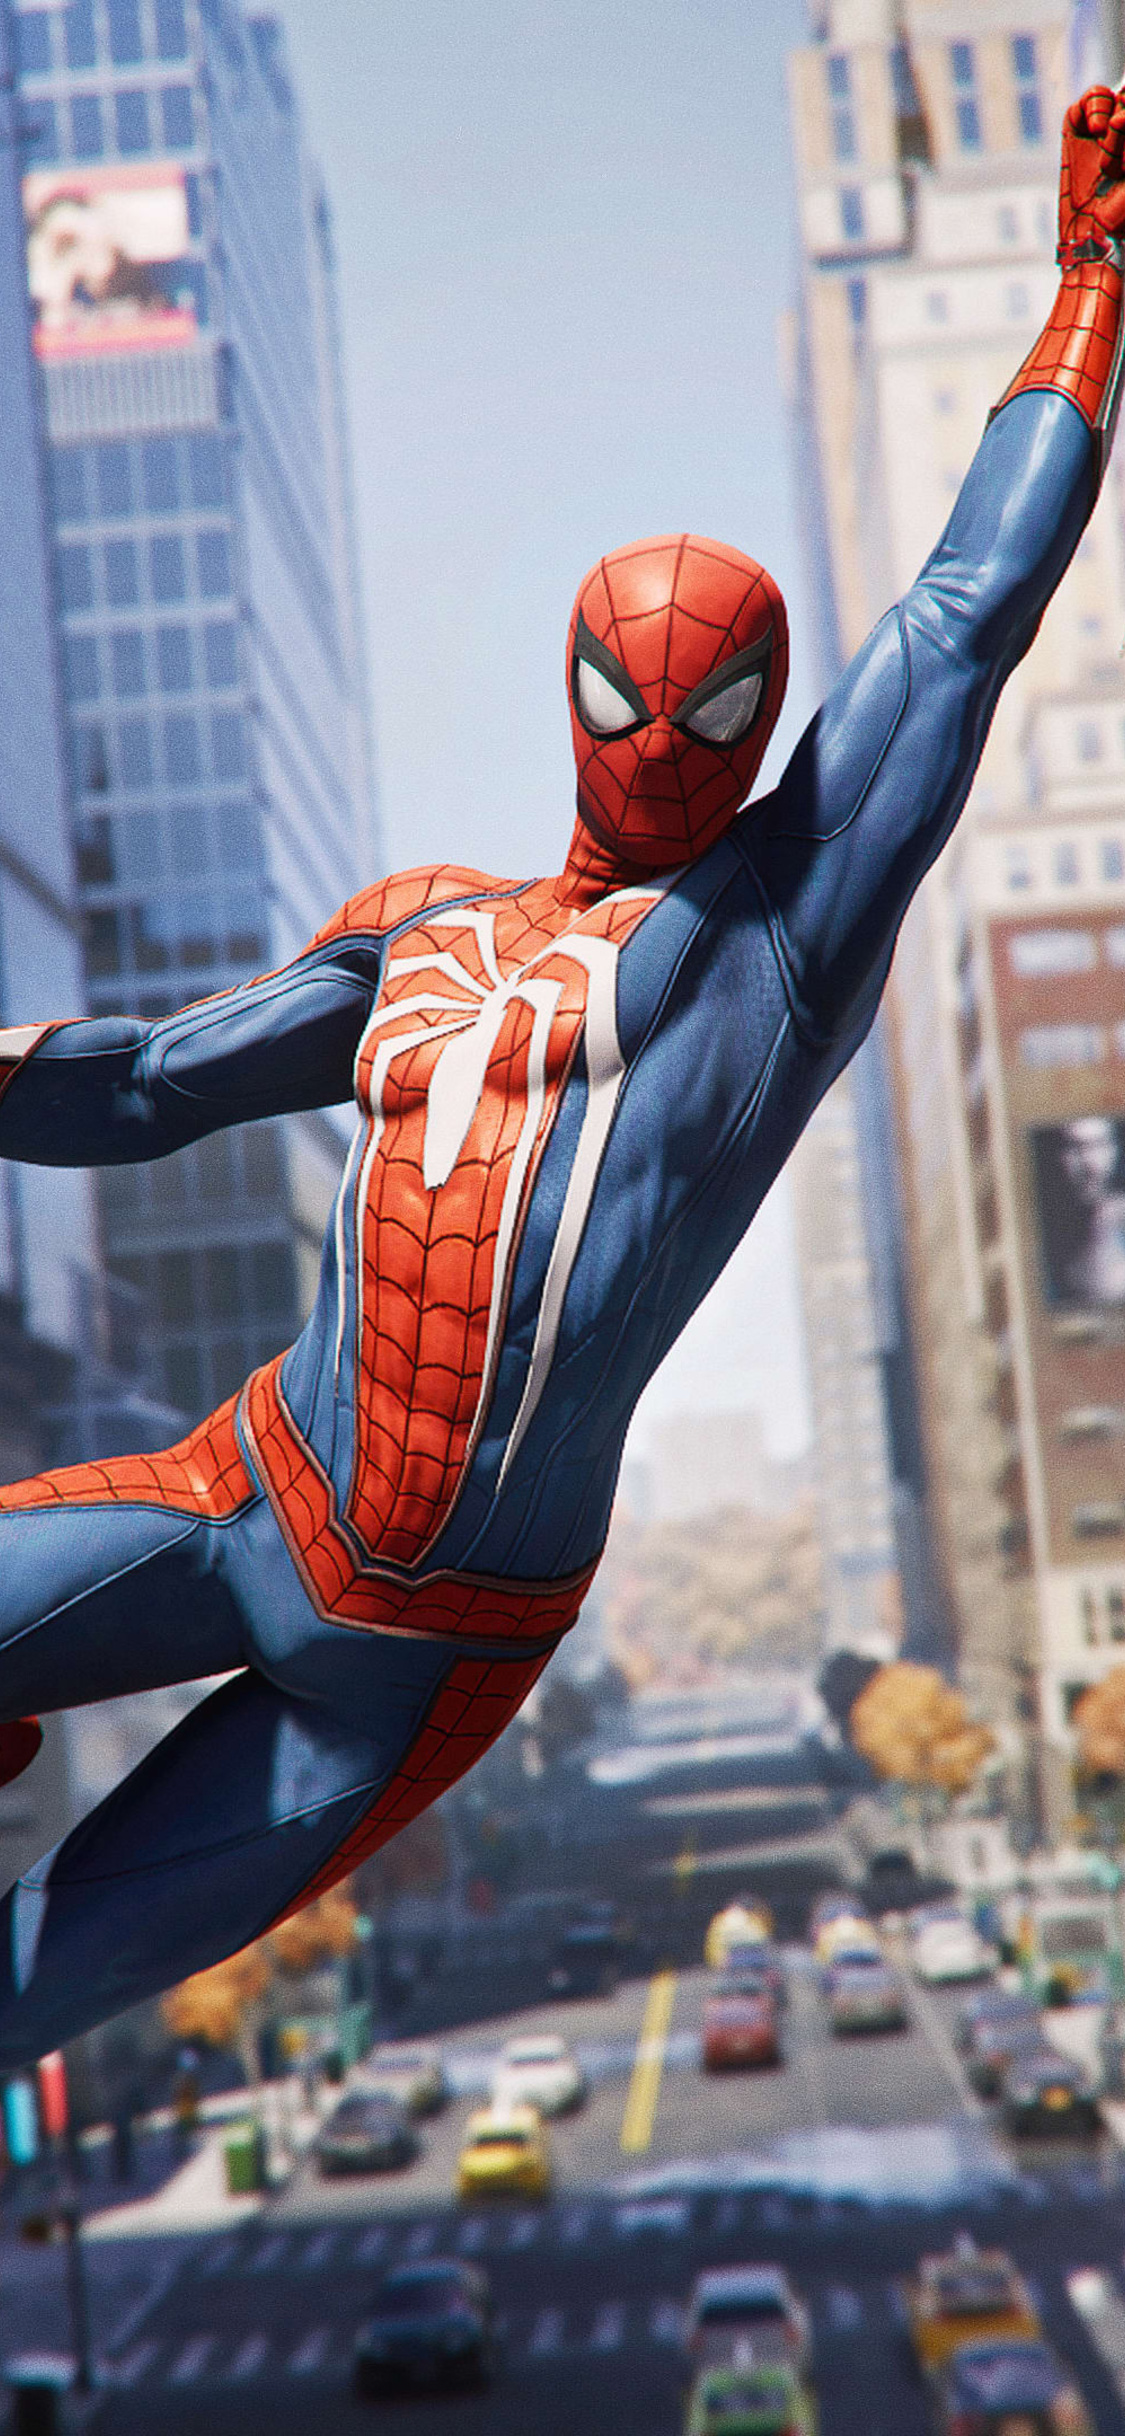 1125x2436 Spiderman Ps4 Pro 4k Iphone XS,Iphone 10,Iphone ...